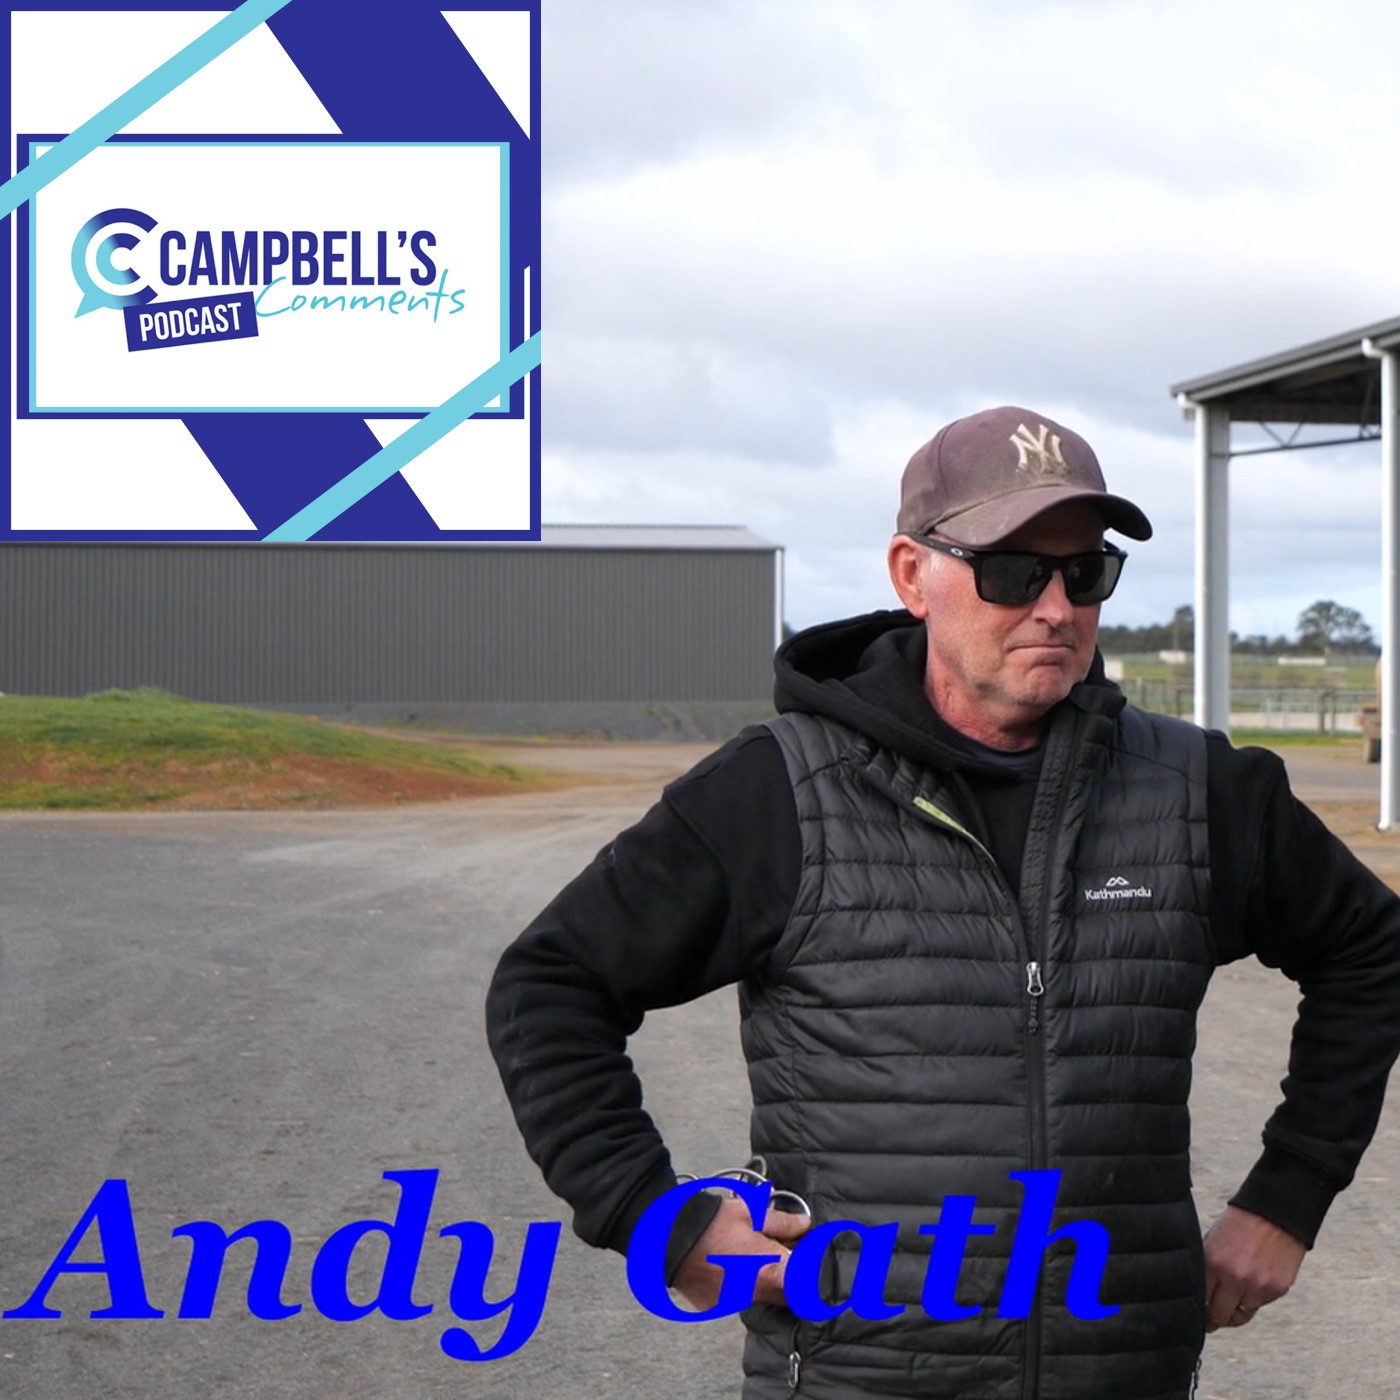 You are currently viewing 261: Campbells Comments with Andy Gath